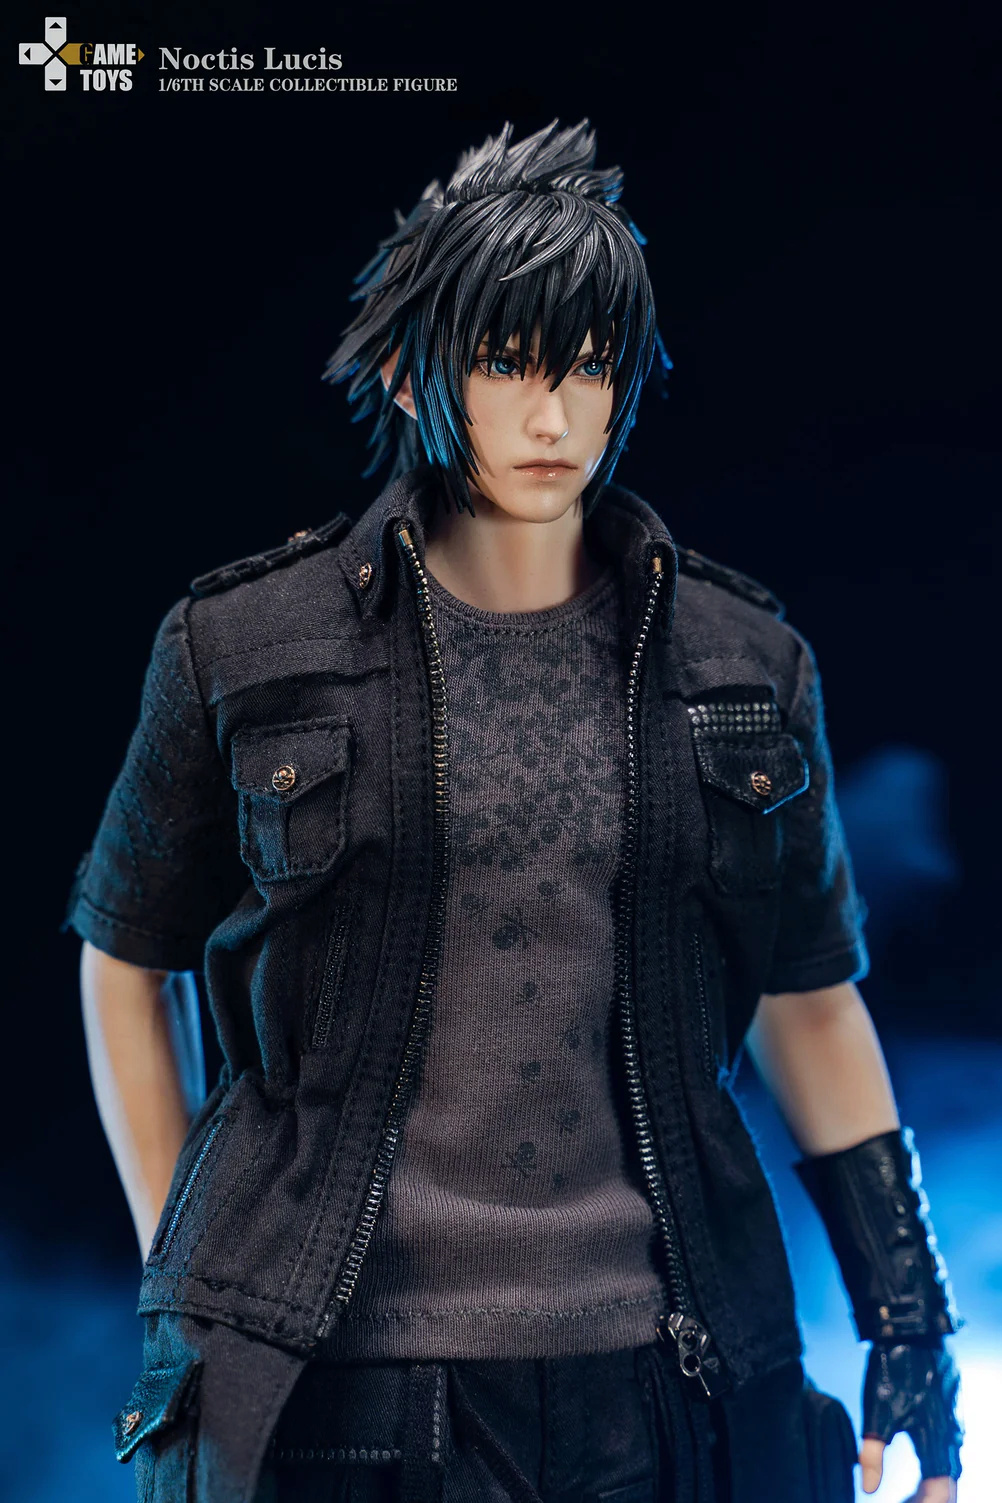 NEW PRODUCT: Gametoys Noctis Lucis, additional accessories, and throne 20_web10